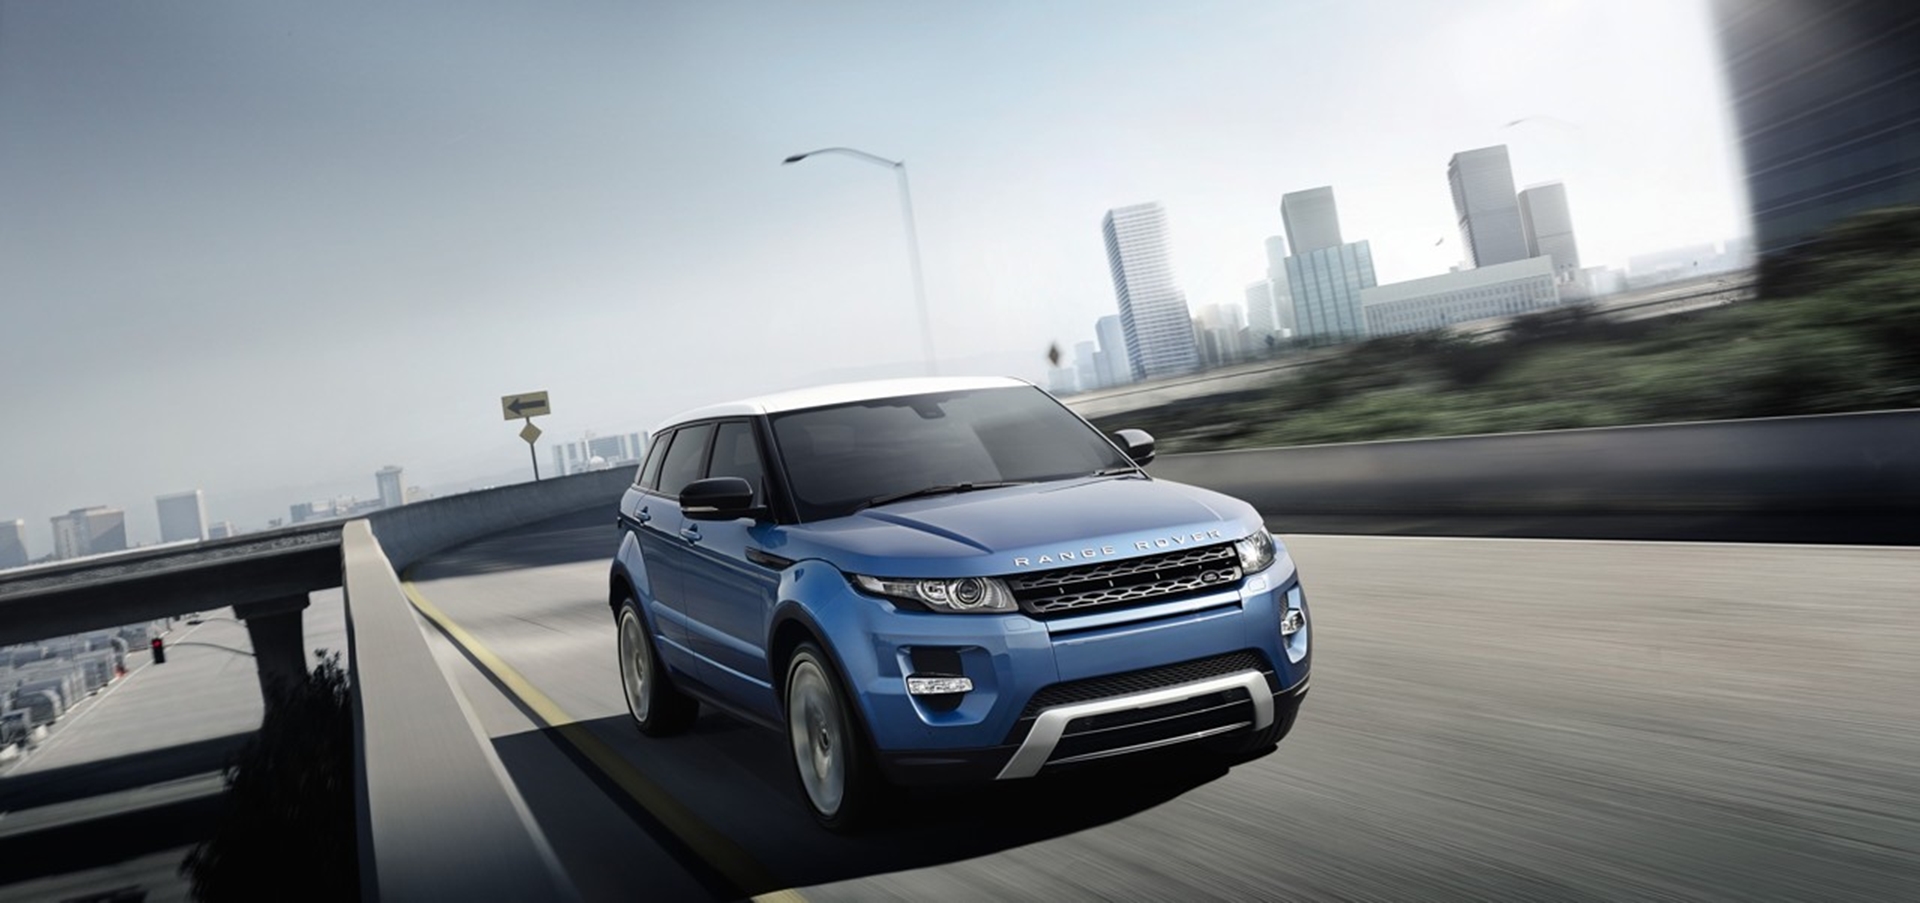 RANGE ROVER EVOQUE ON TRACK FOR SOUTH AFRICA COTY